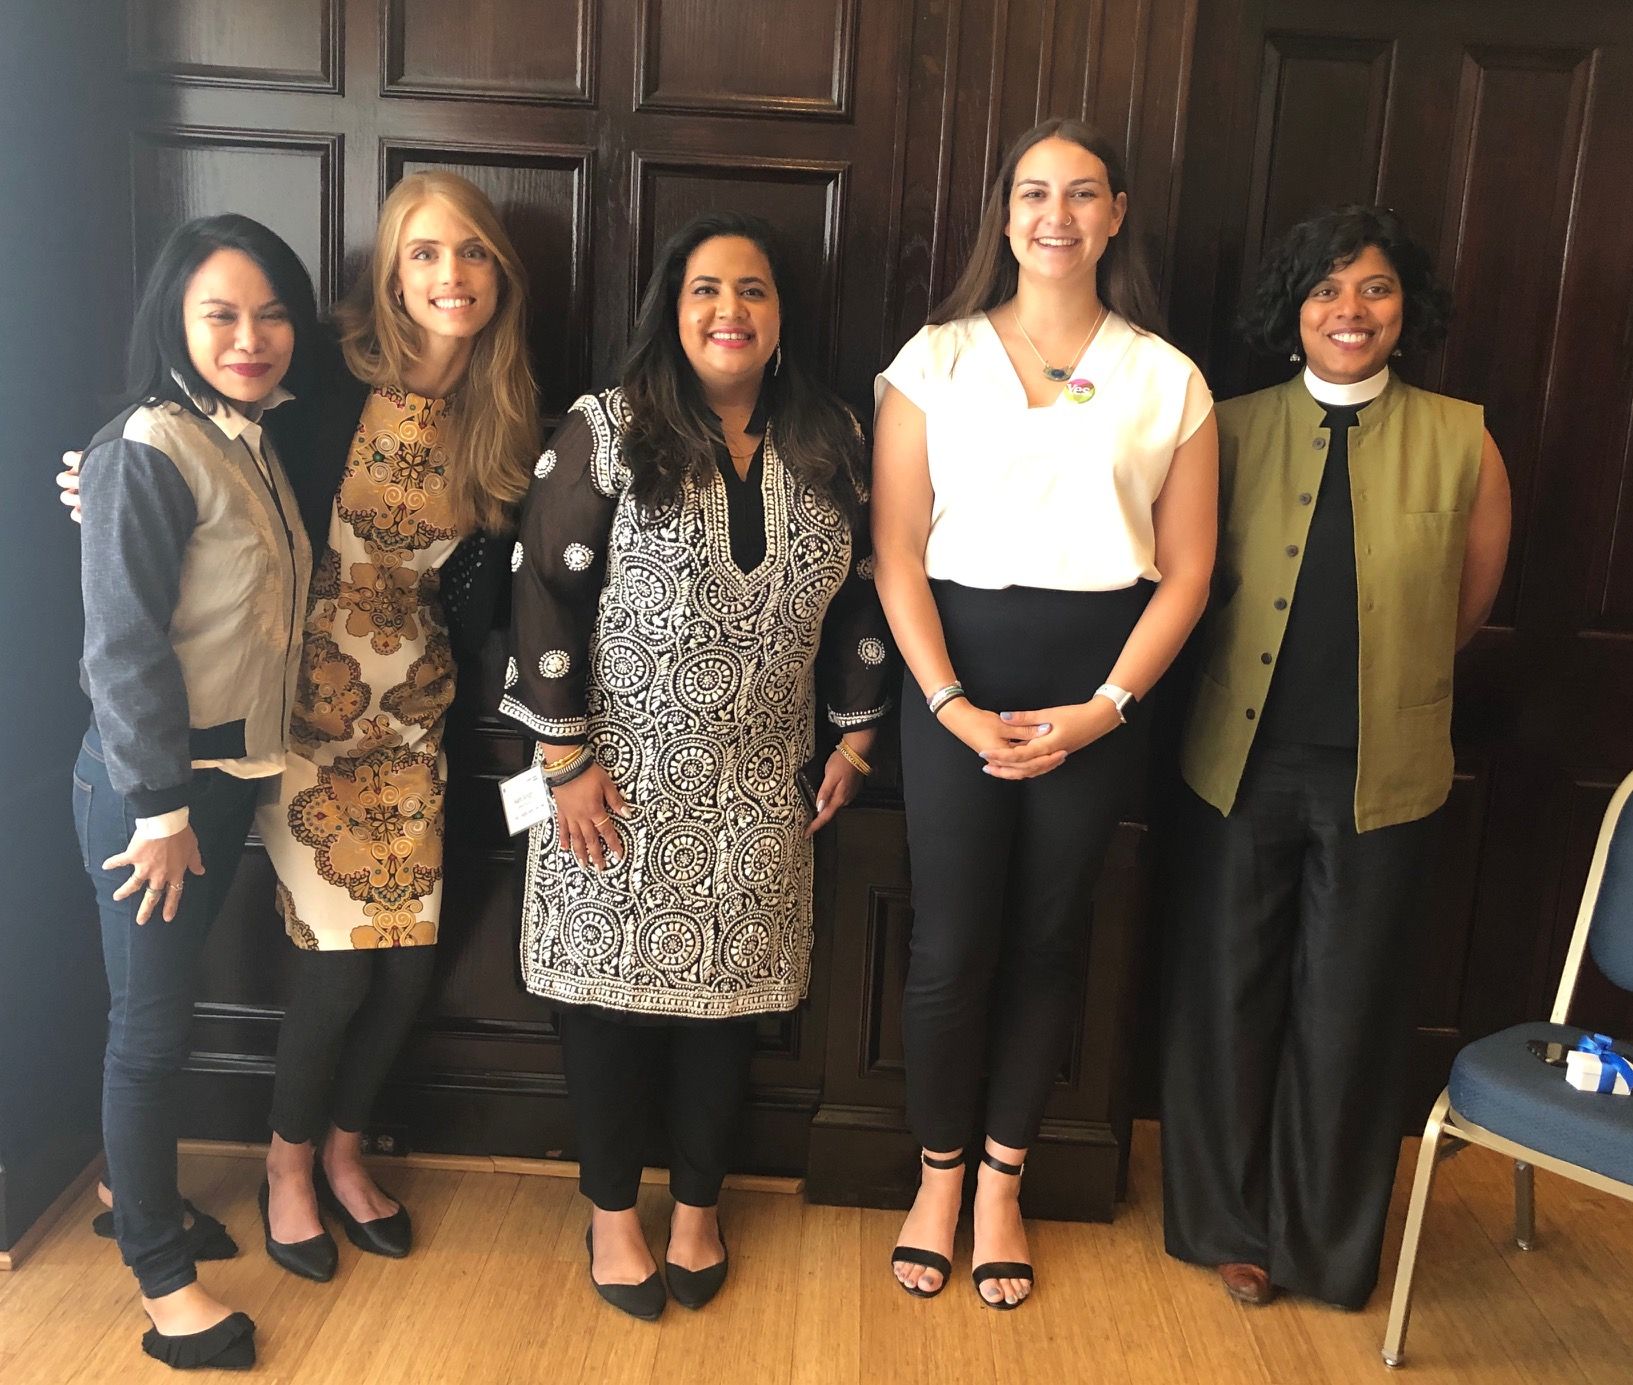 Panelists discussed how religion affects activism and gender issues in Northern Ireland, India, Saudi Arabia, and the Philippines. Image by Kem Sawyer. Washington, D.C., 2019.